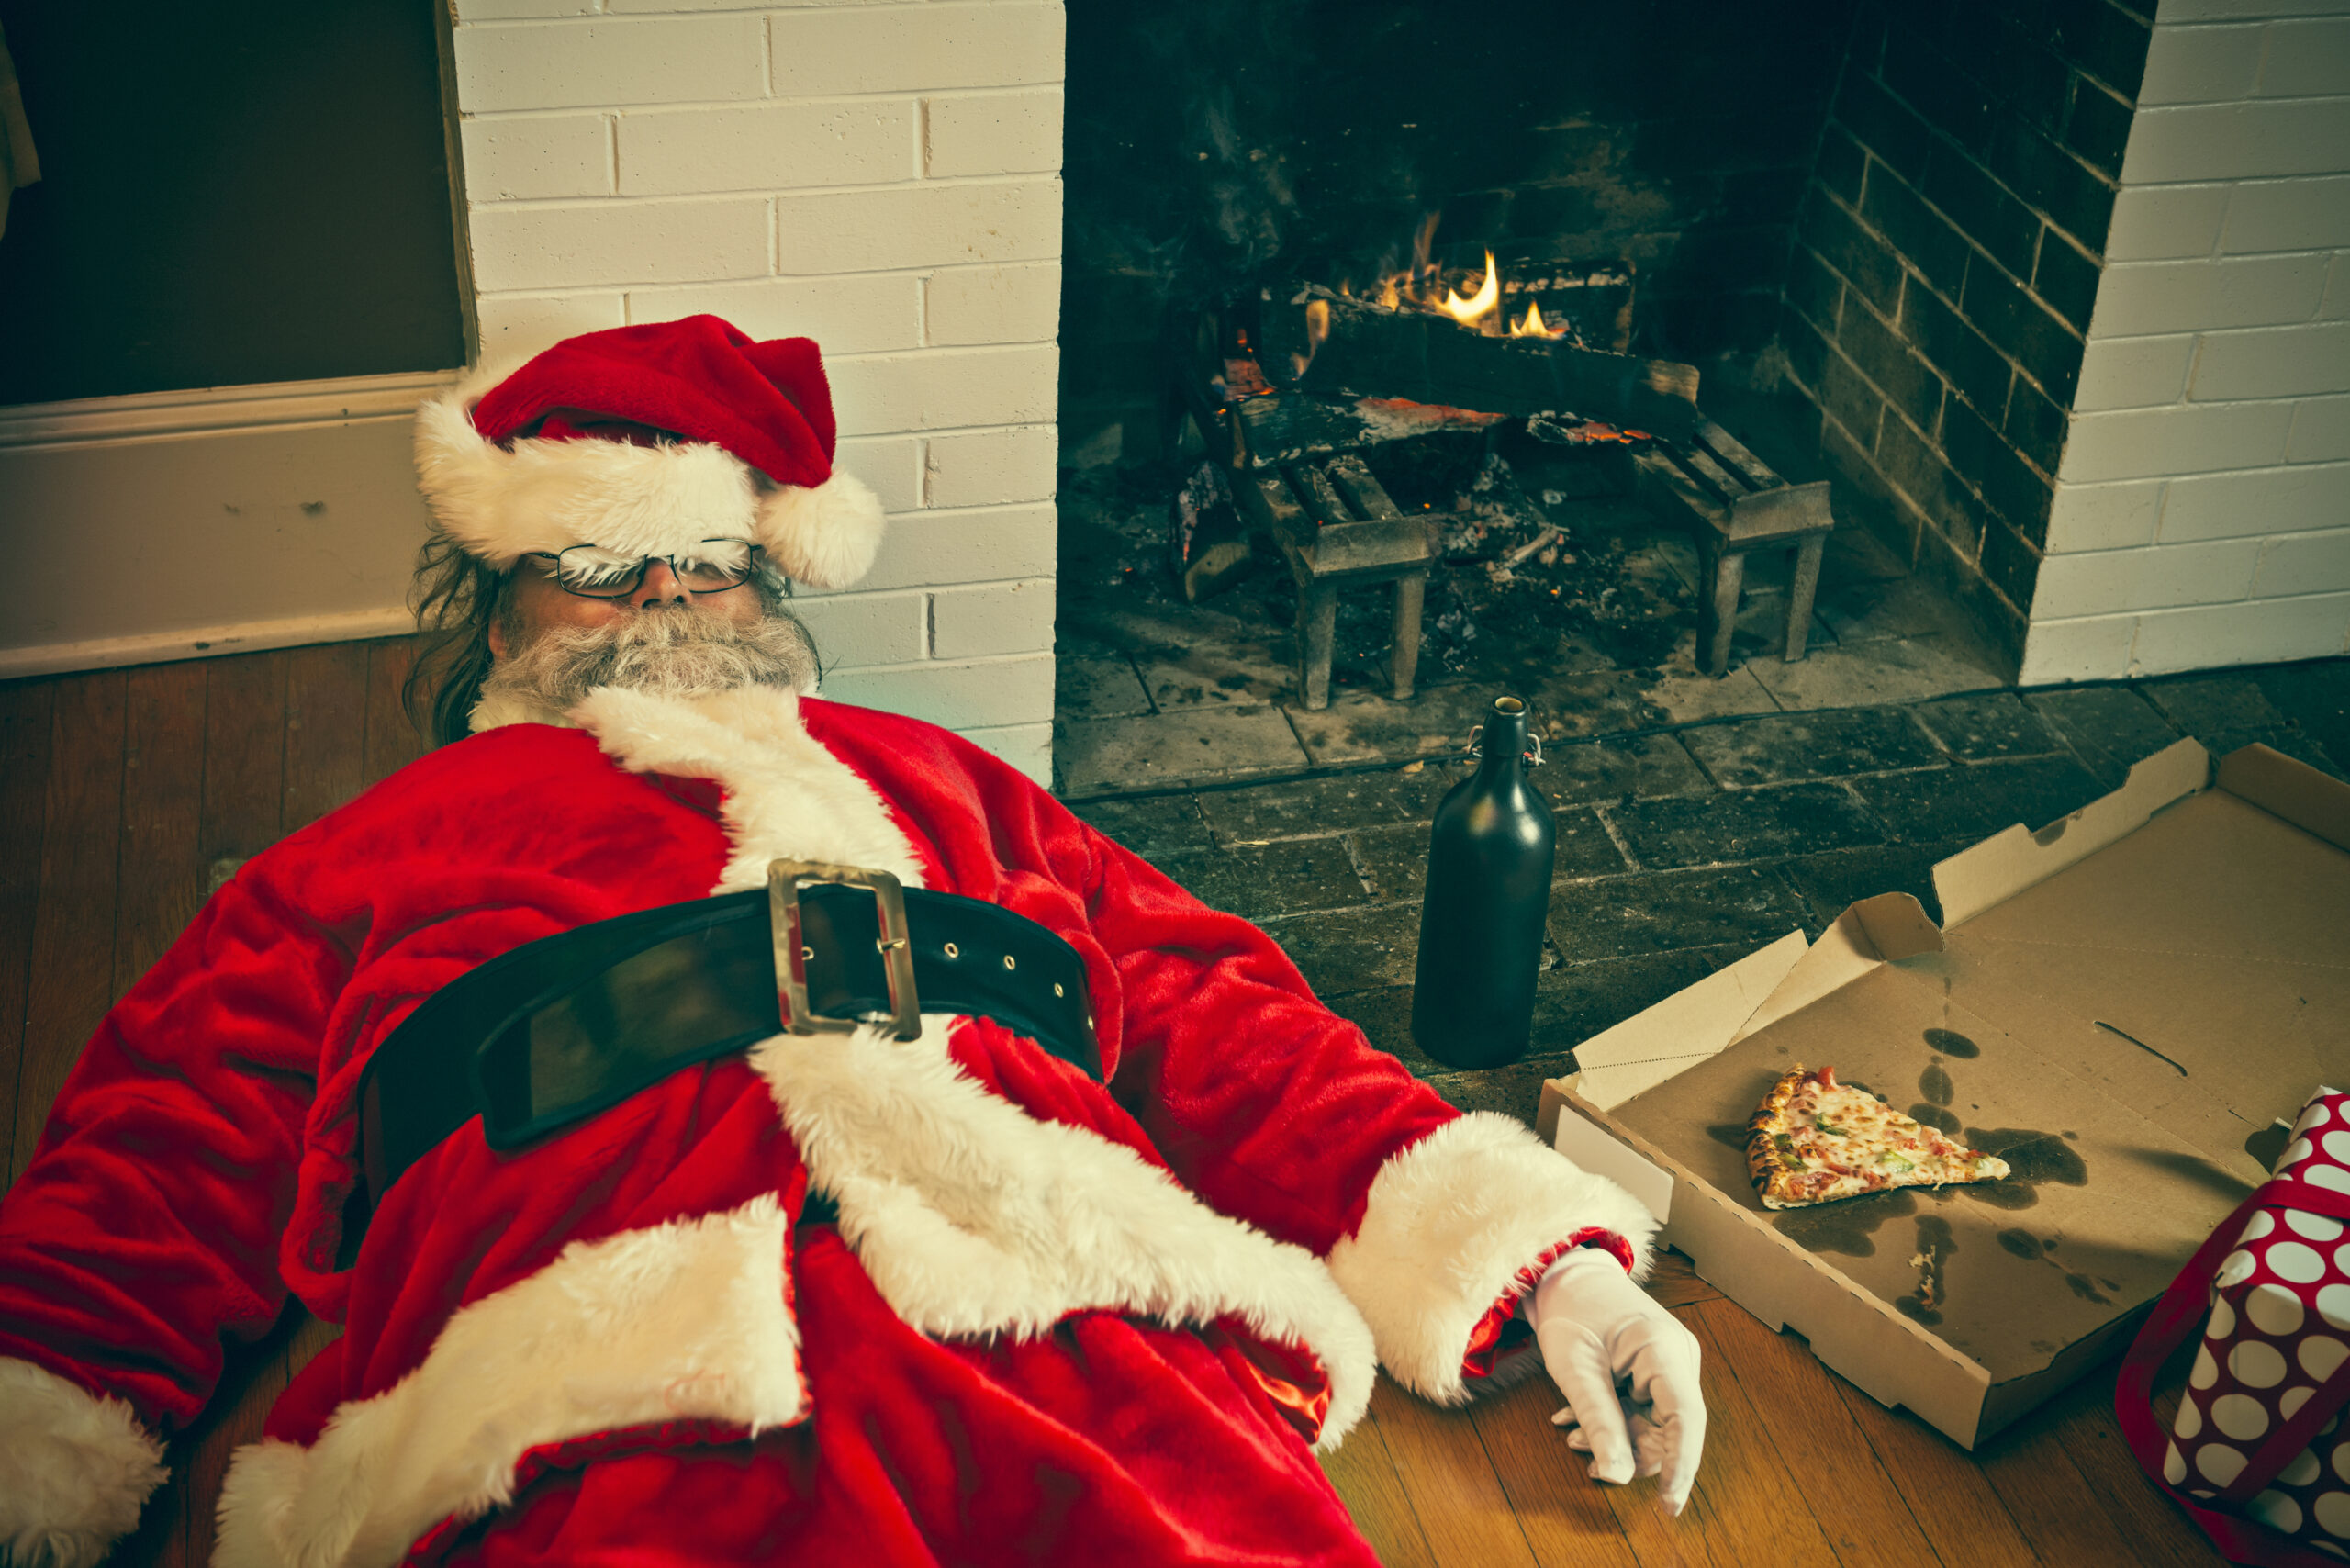 How to stop Christmas from ruining your health and fitness goals